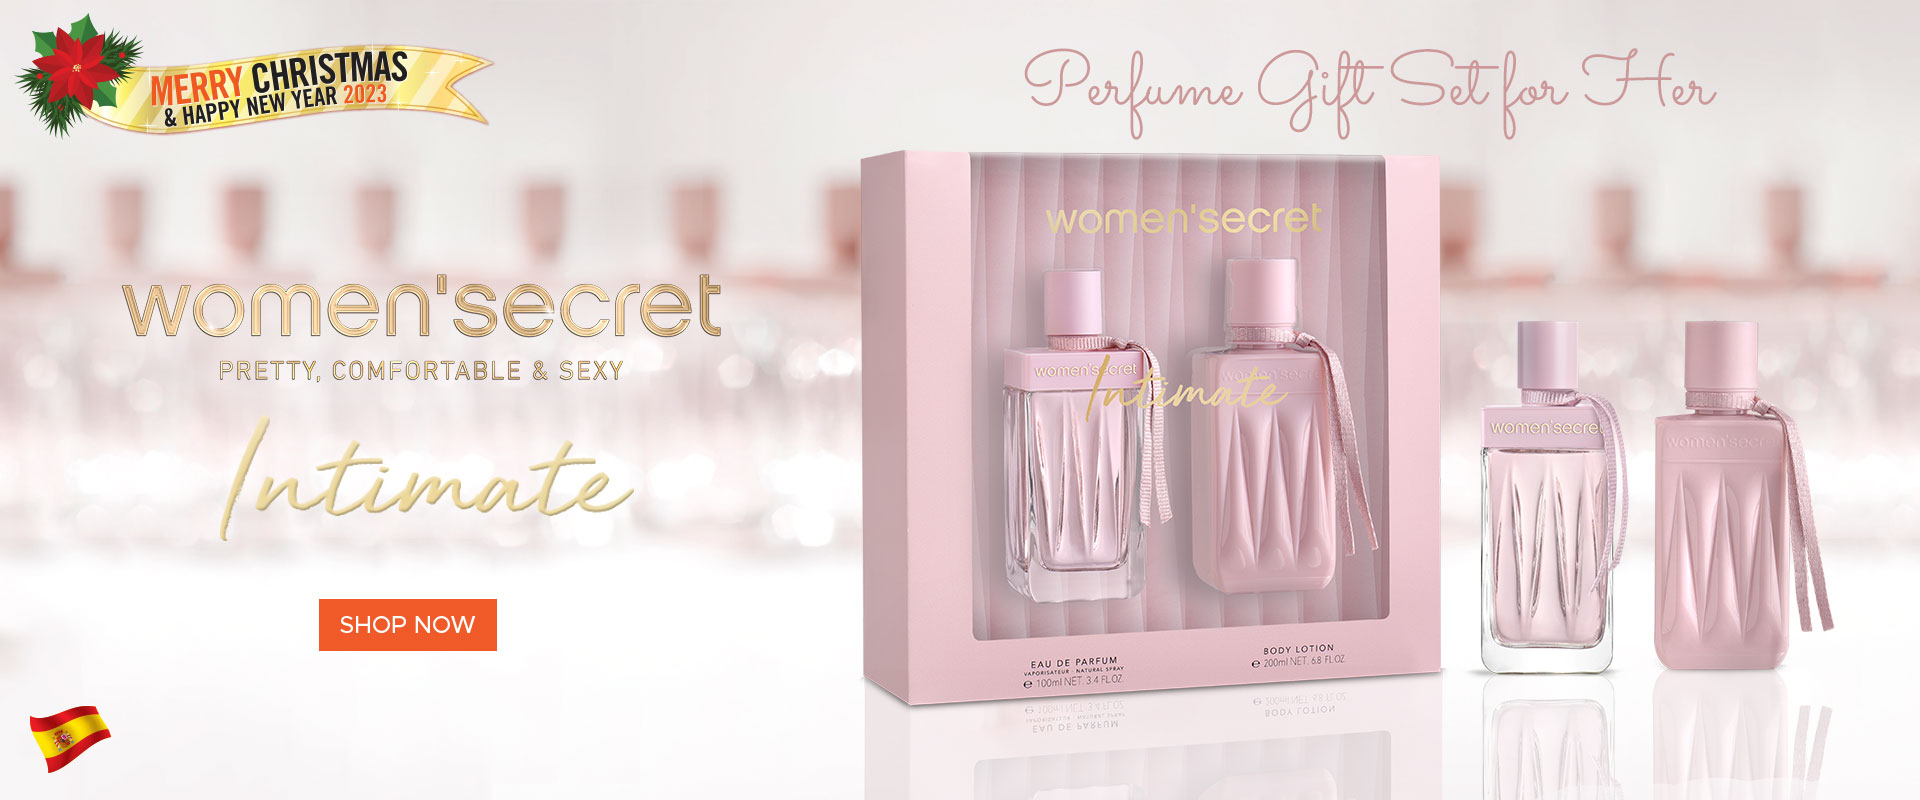 Perfume Gift Set for Her